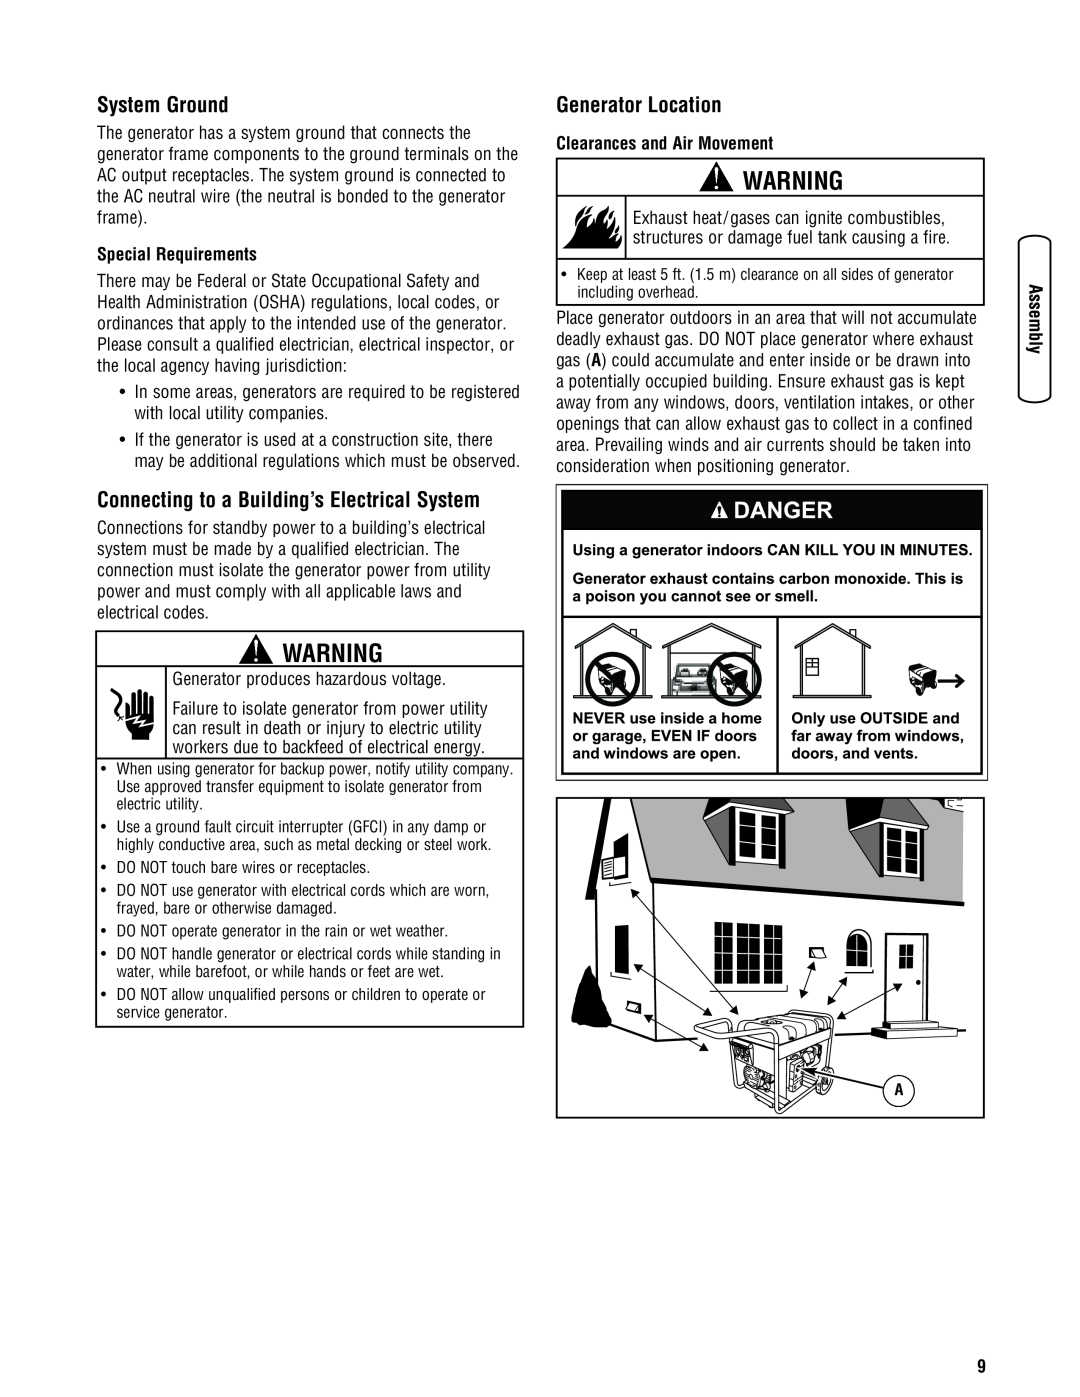 Briggs & Stratton Portable Generator manual System Ground, Connecting to a Building’s Electrical System, Generator Location 